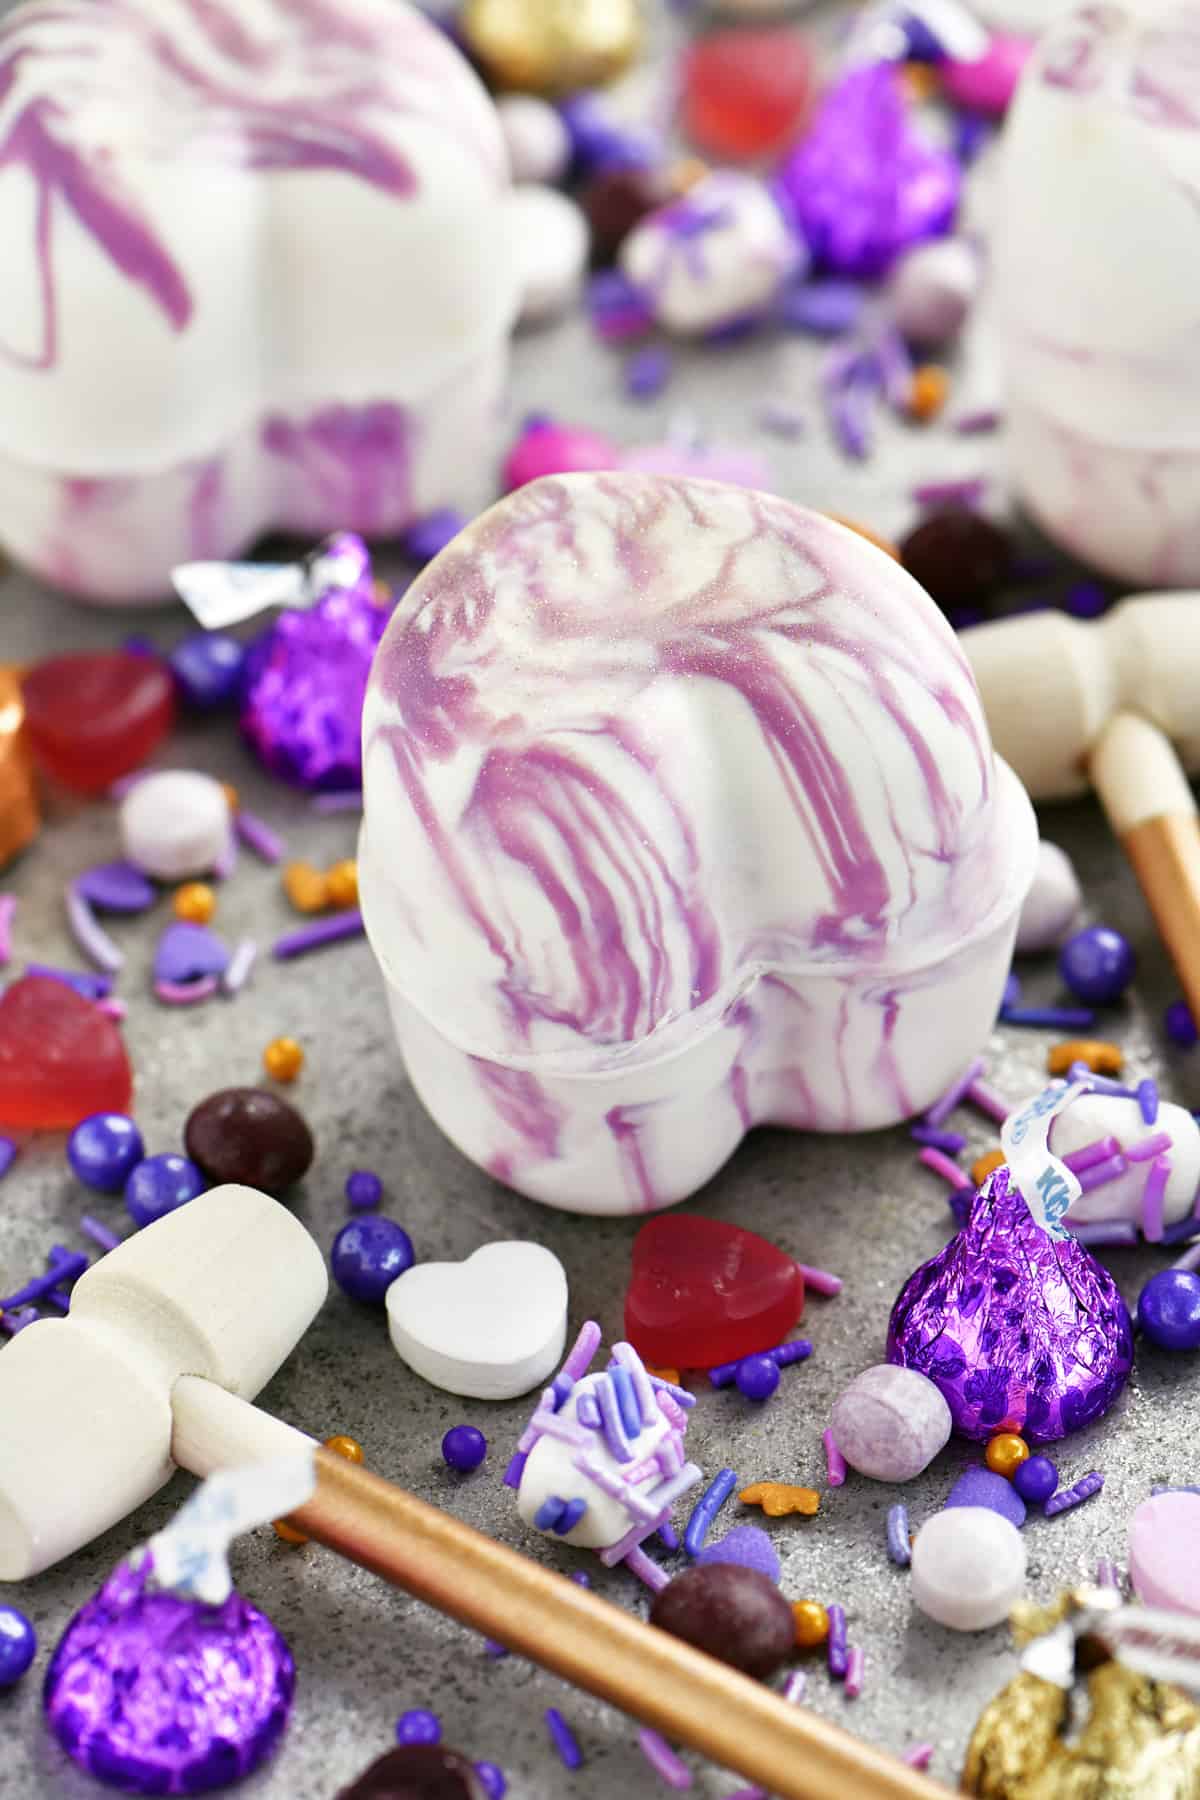 white chocolate heart with purple swirls, candy, sprinkles, and a mini hammer